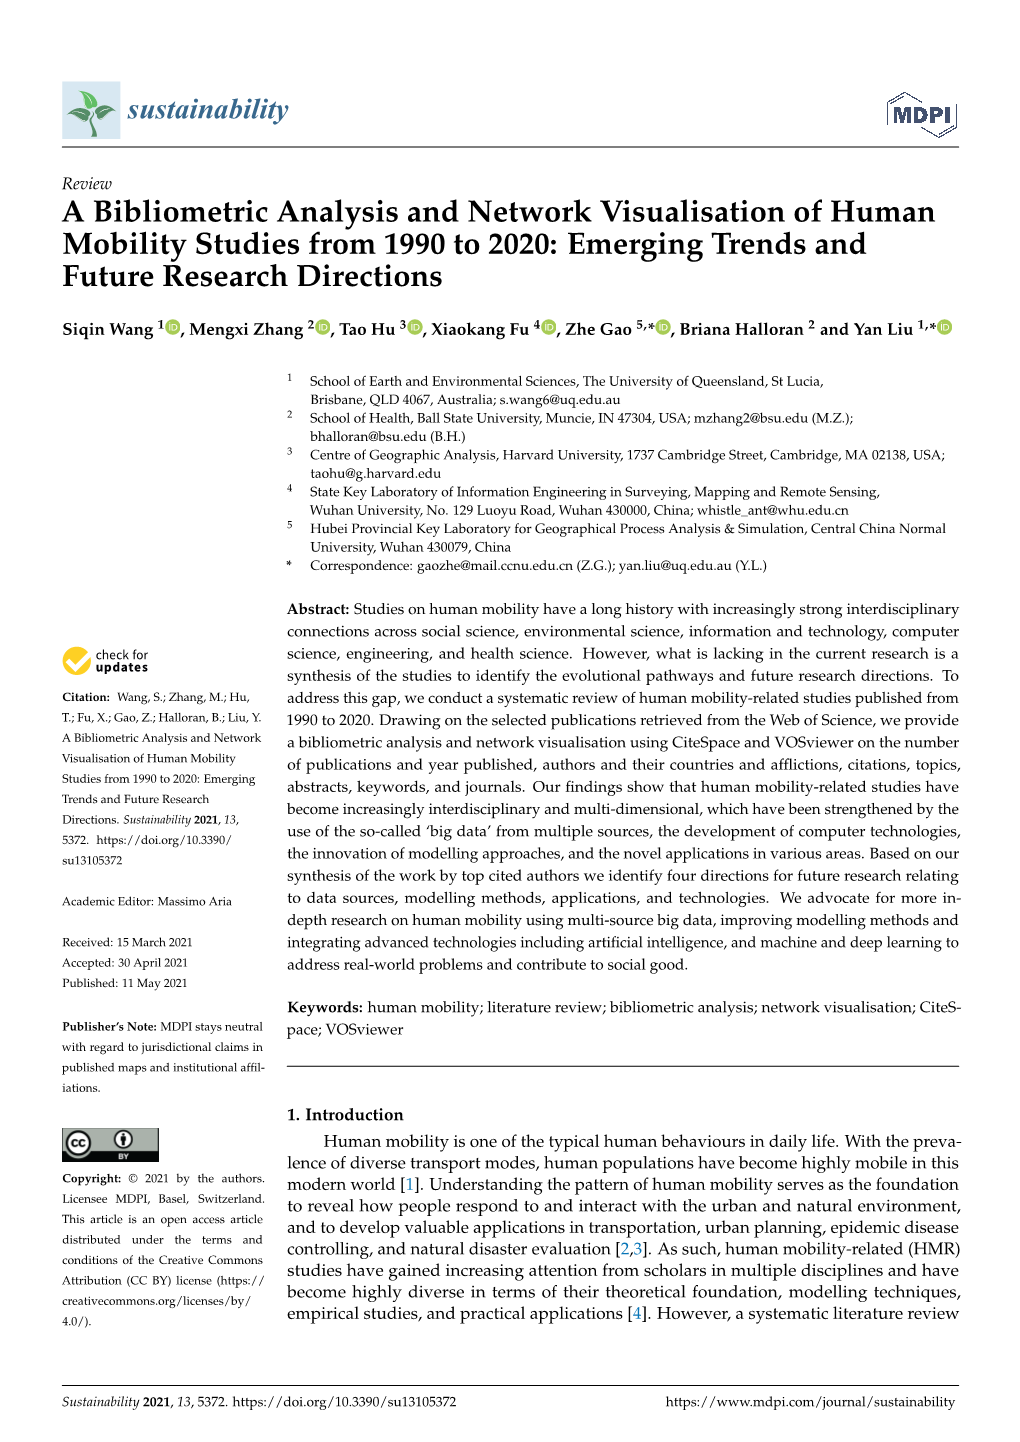 A Bibliometric Analysis and Network Visualisation of Human Mobility Studies from 1990 to 2020: Emerging Trends and Future Research Directions